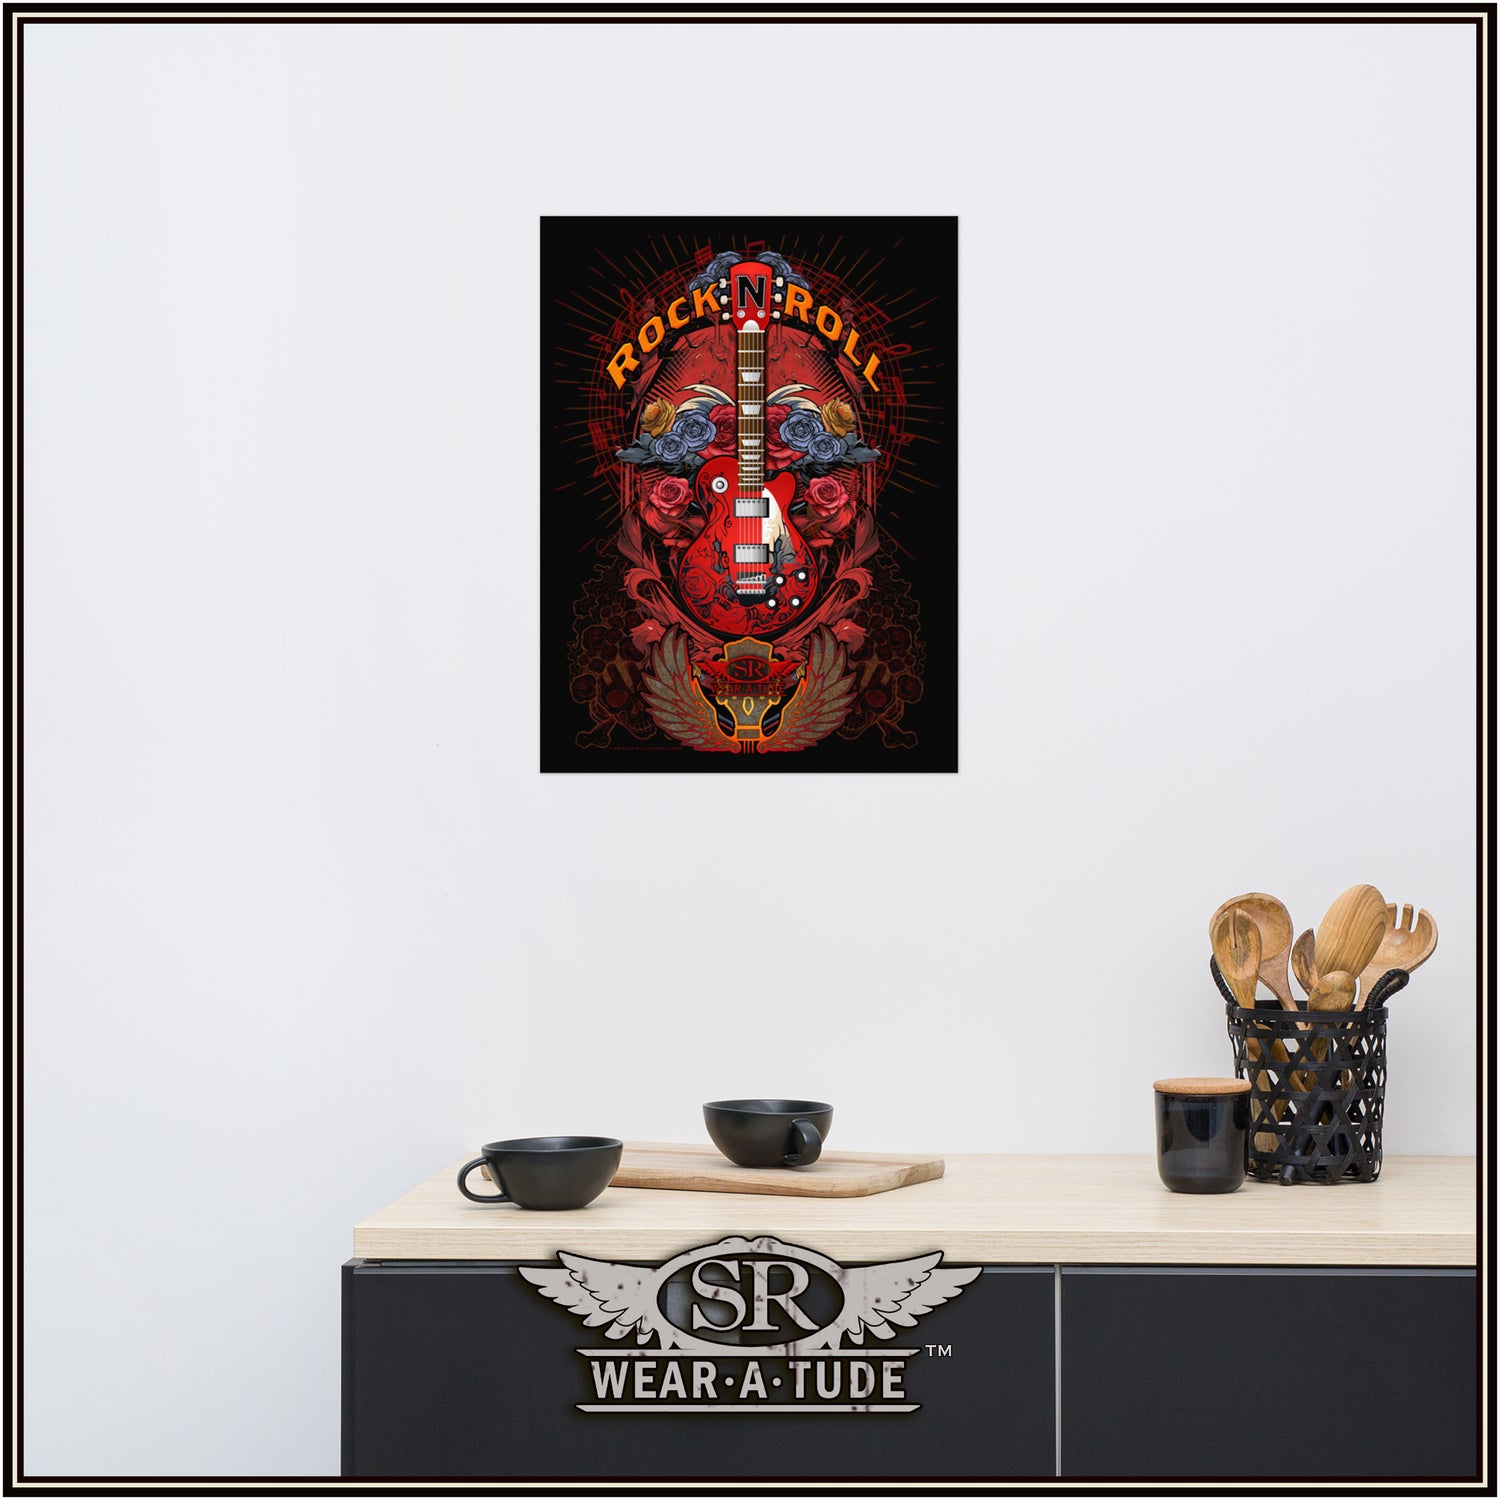 Looking for that slick classic rock and roll art for your music room? This high-resolution image of roses and a guitar on a black isolated background trimmed with our signature intricate style of skull and bone filigree will look epic on any wall. Our museum-quality posters are made on thick matte paper. Add a wonderful accent to your room and office with these quality posters from SR Wear Atude.